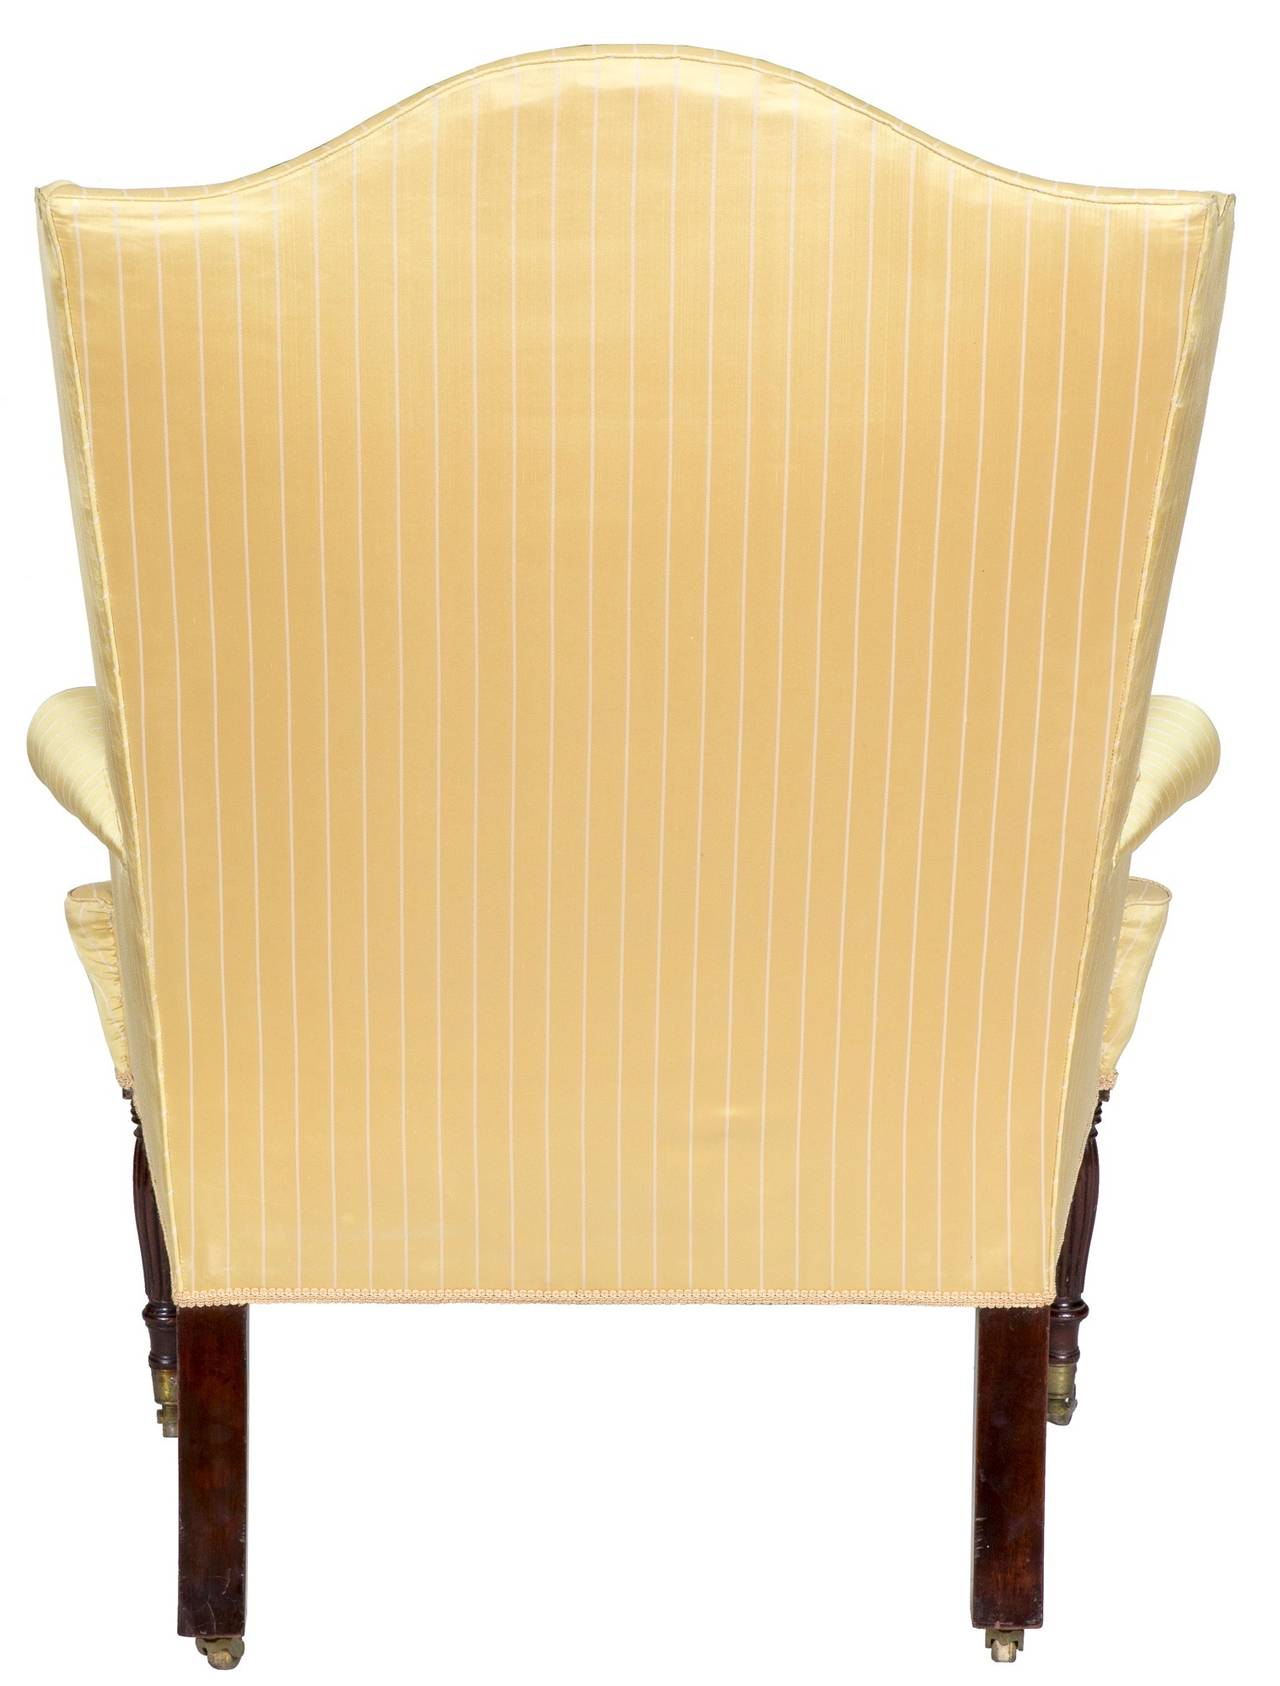 This wing chair retains the wing chair form, as seen in the last half of the 18th century with the exception of reeded legs, which harken to the classical period. The legs are beautifully turned and reeded and retain their ample-sized wheels both in